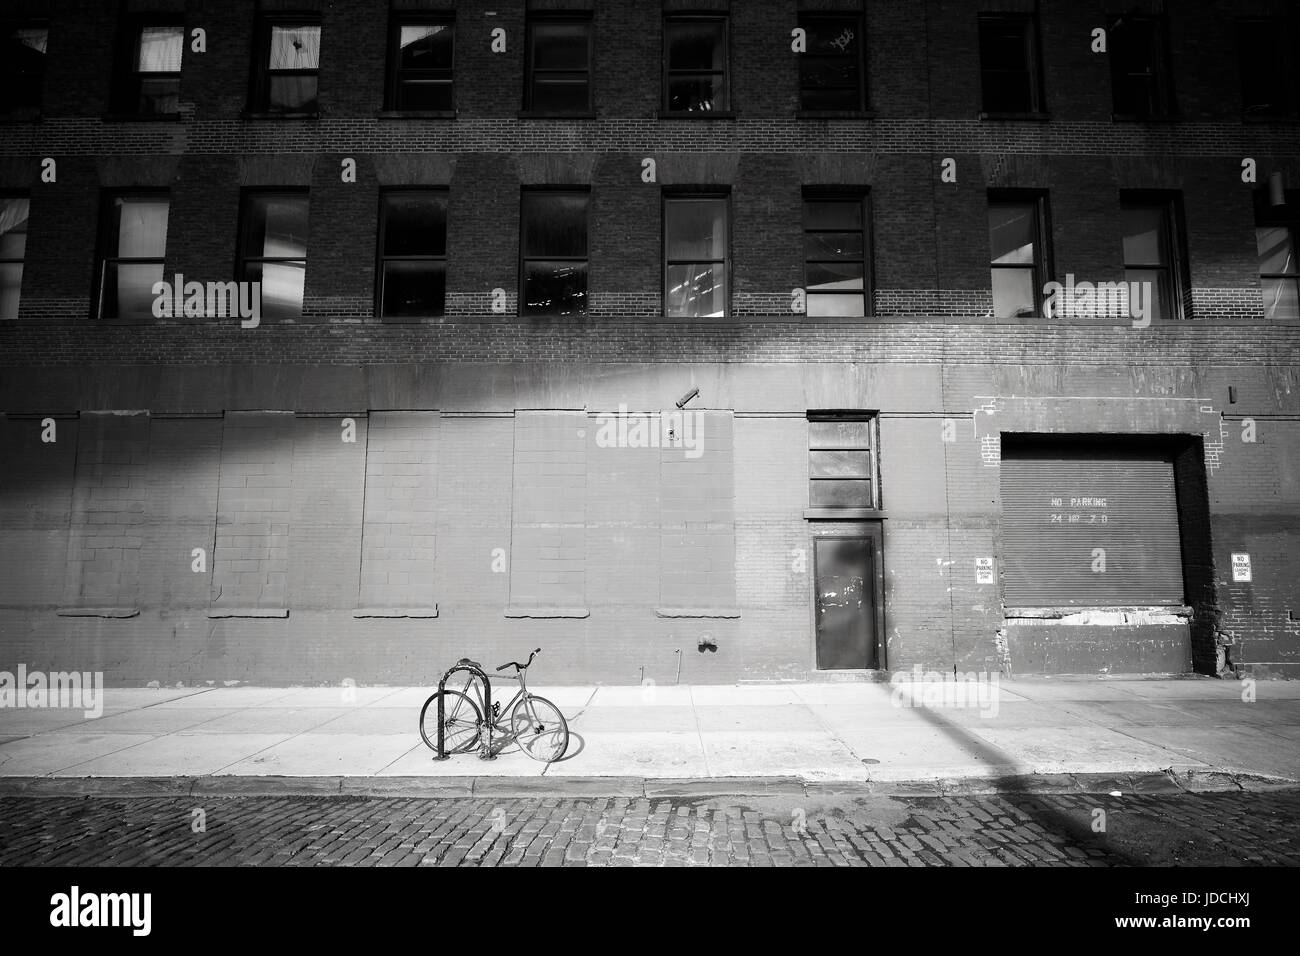 Forgotten bike. Bicycle locked by a street in Dumbo neighborhood at sunset, New York City, USA. Stock Photo